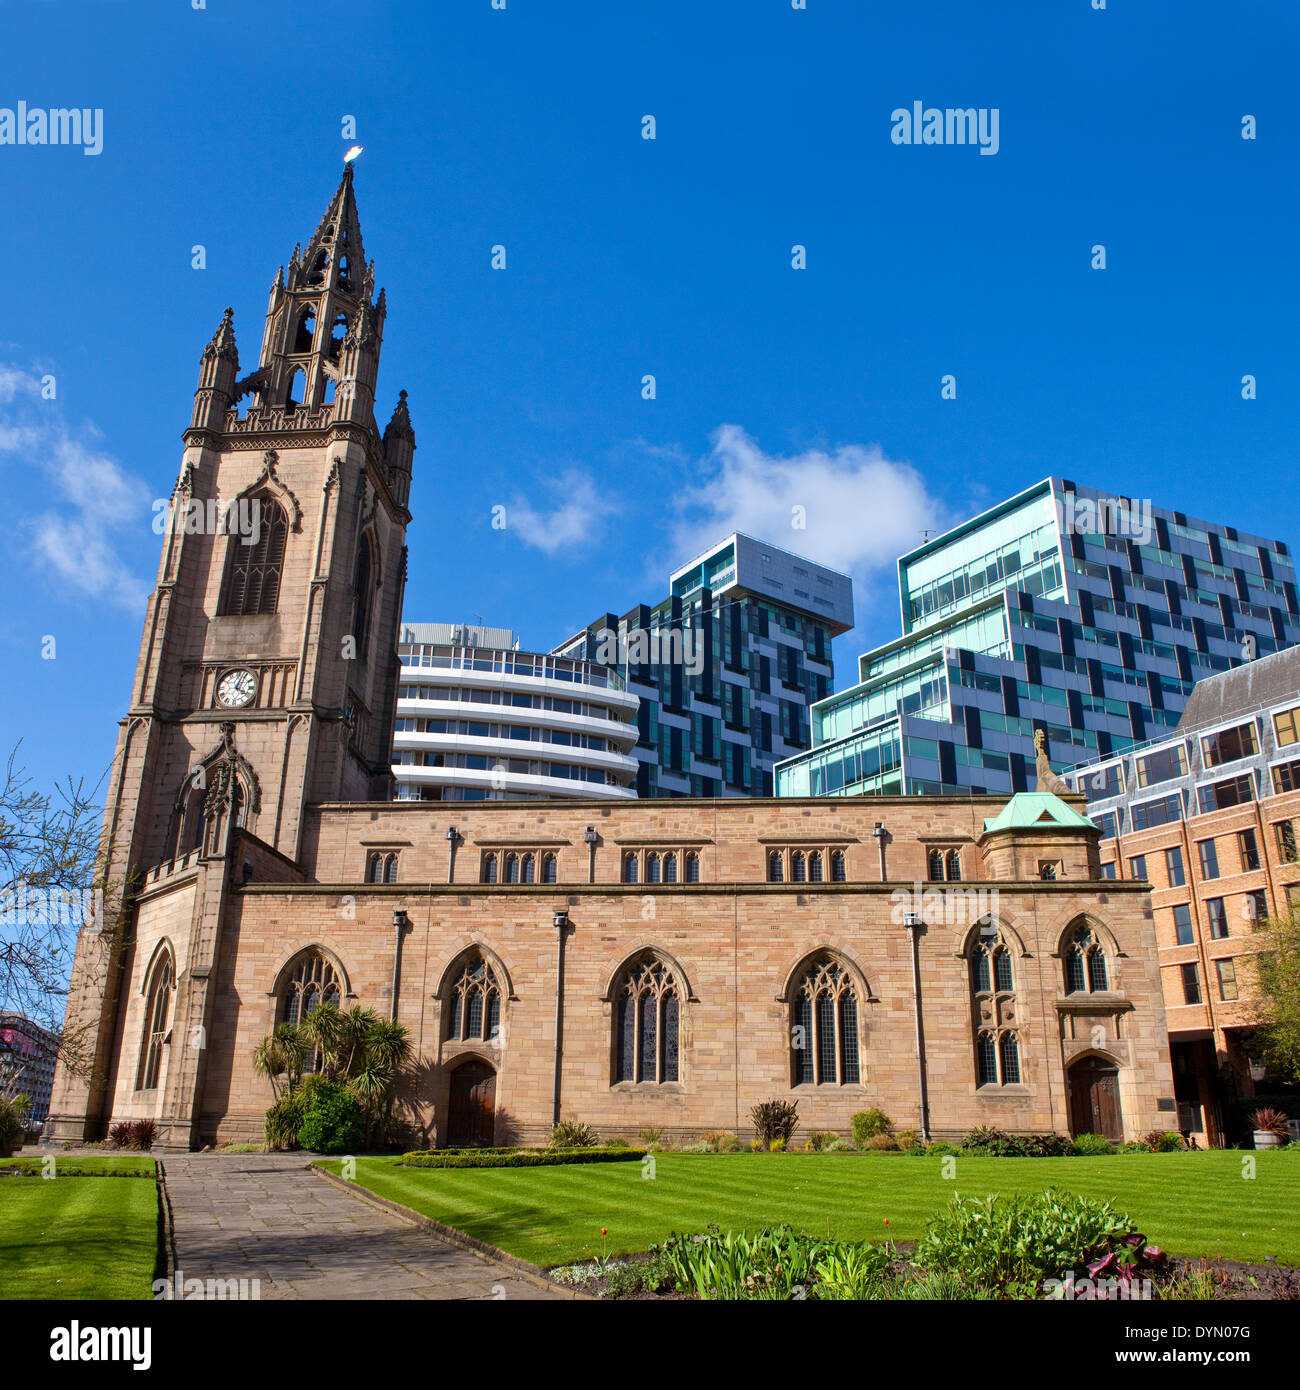 The historic church of Our Lady and St Nicholas in Liverpool. Stock Photo